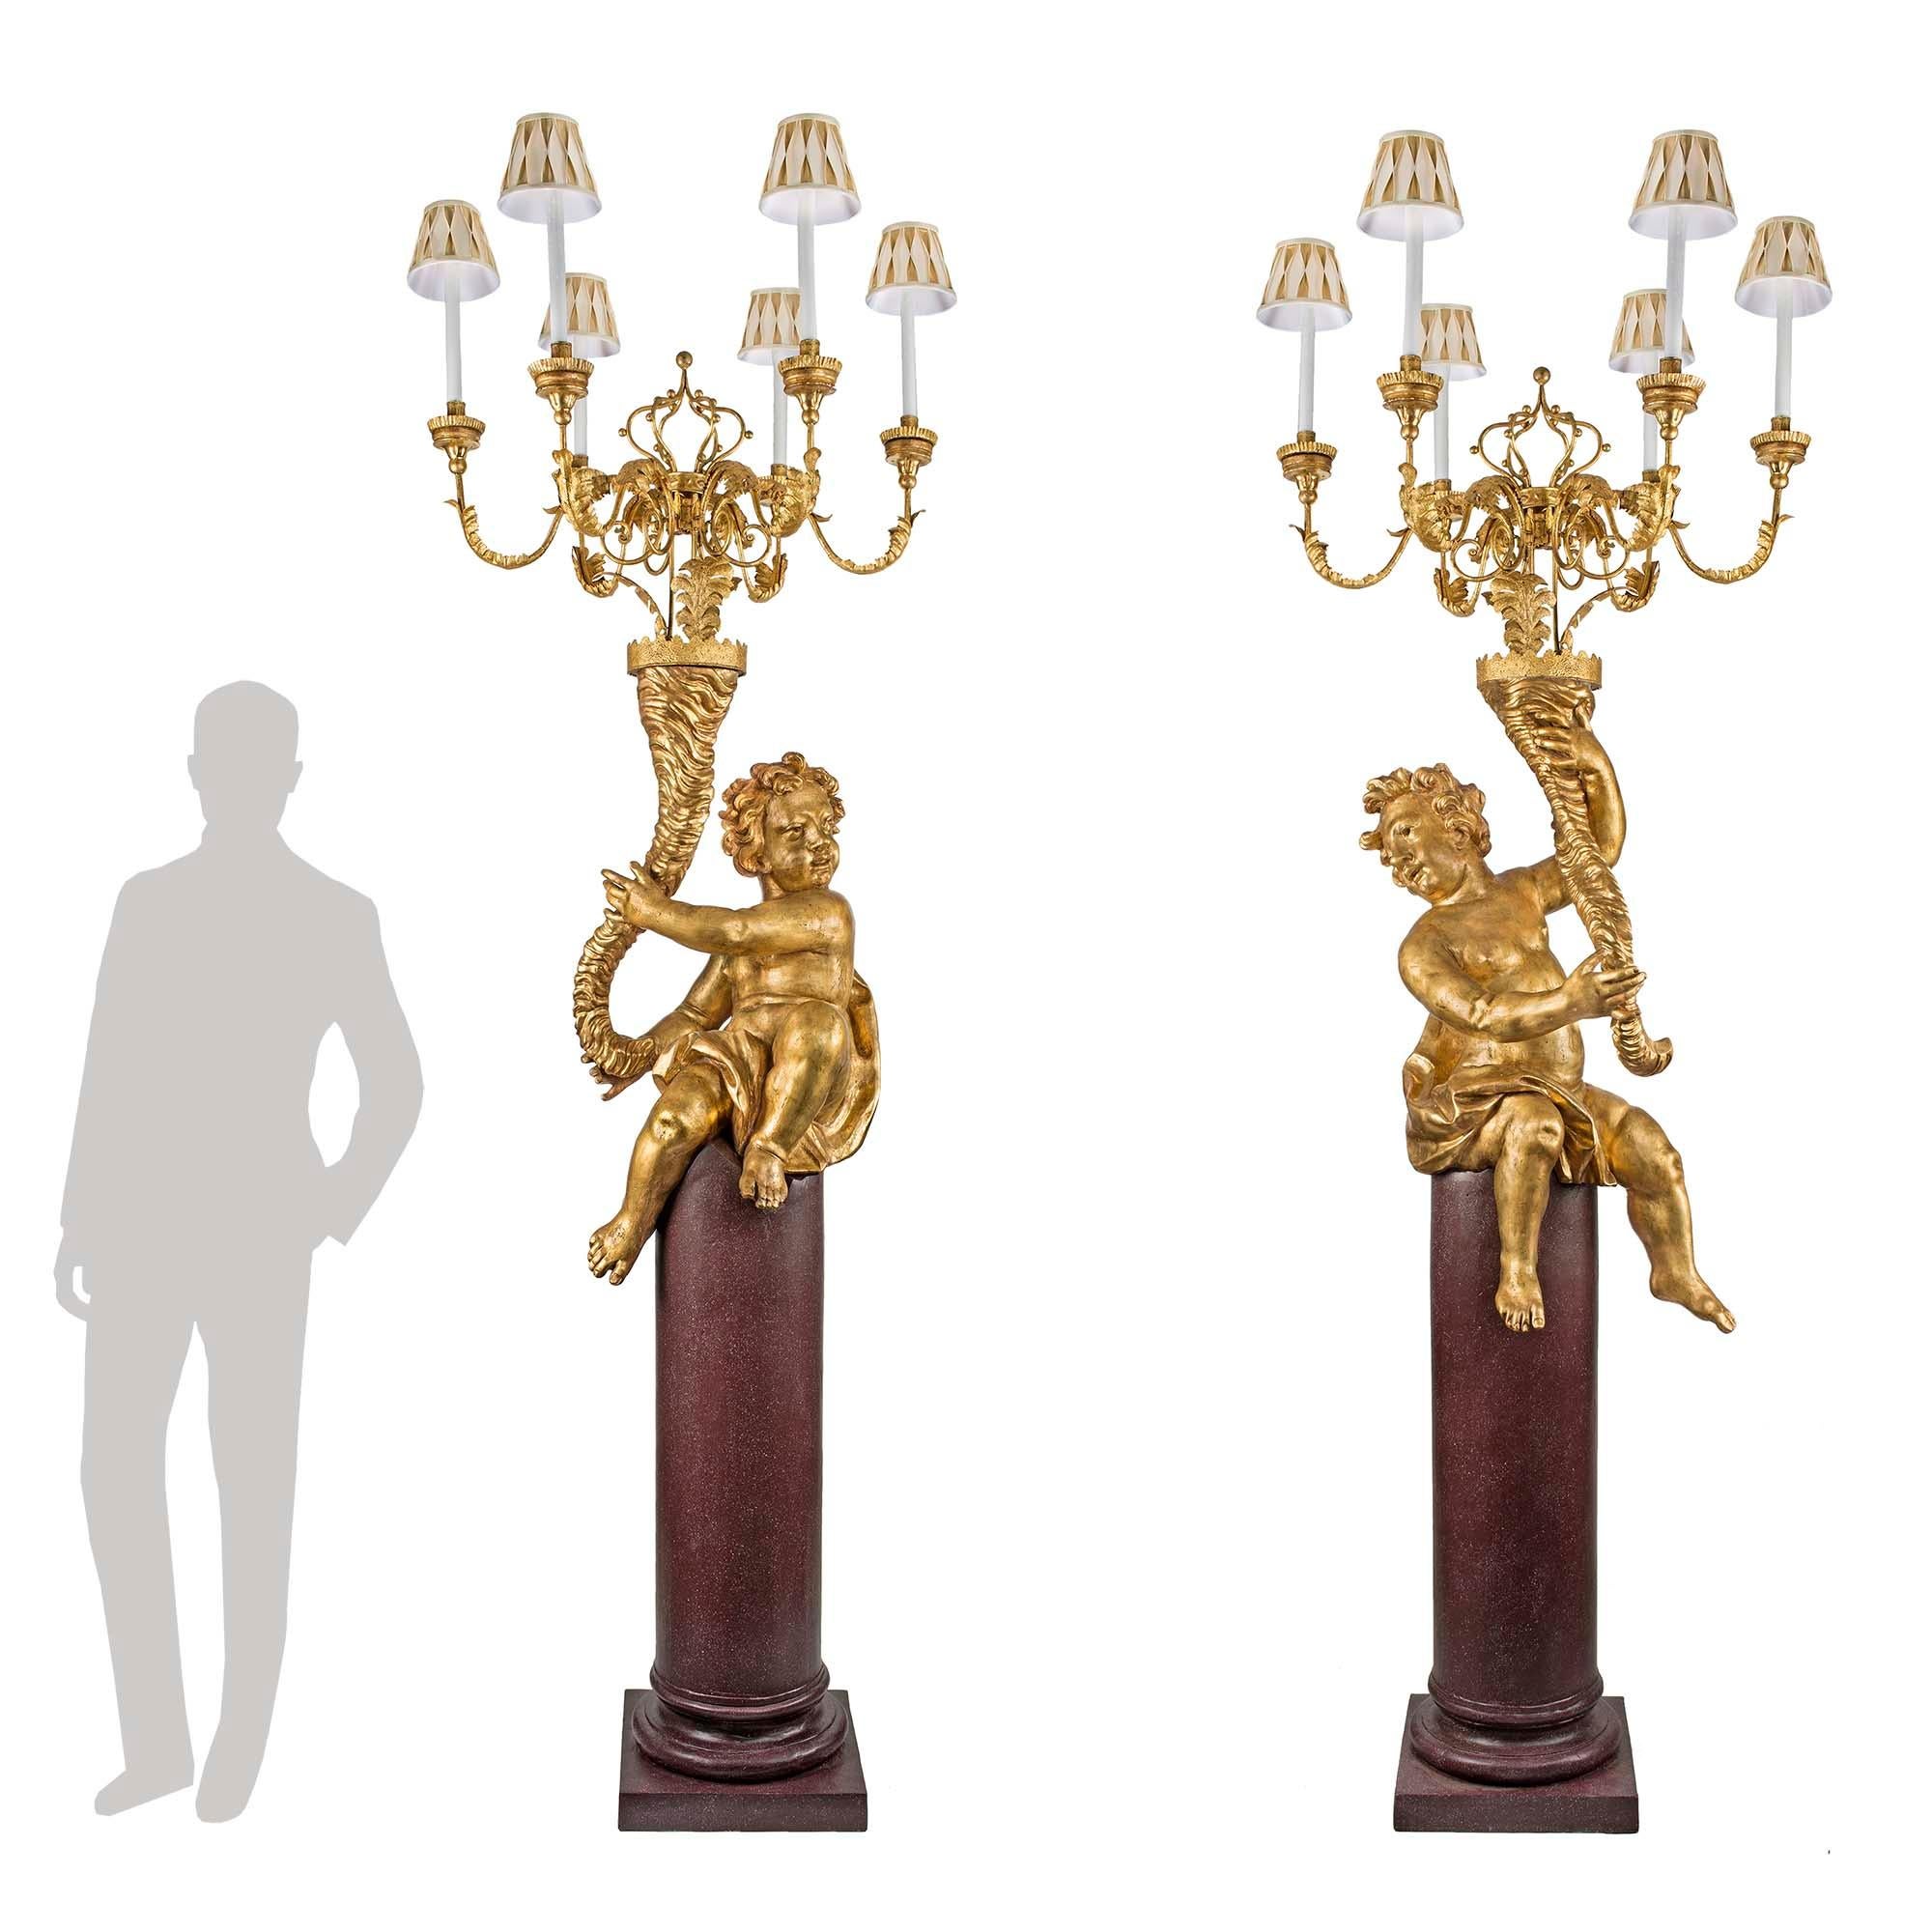 A stunning and monumental true pair of Italian 17th century giltwood and gilt iron six arm cherub candelabra torchières, circa 1680. Each torchières is raised by a sensationally 19th century faux painted Porphyry pedestal, with a mottled bottom